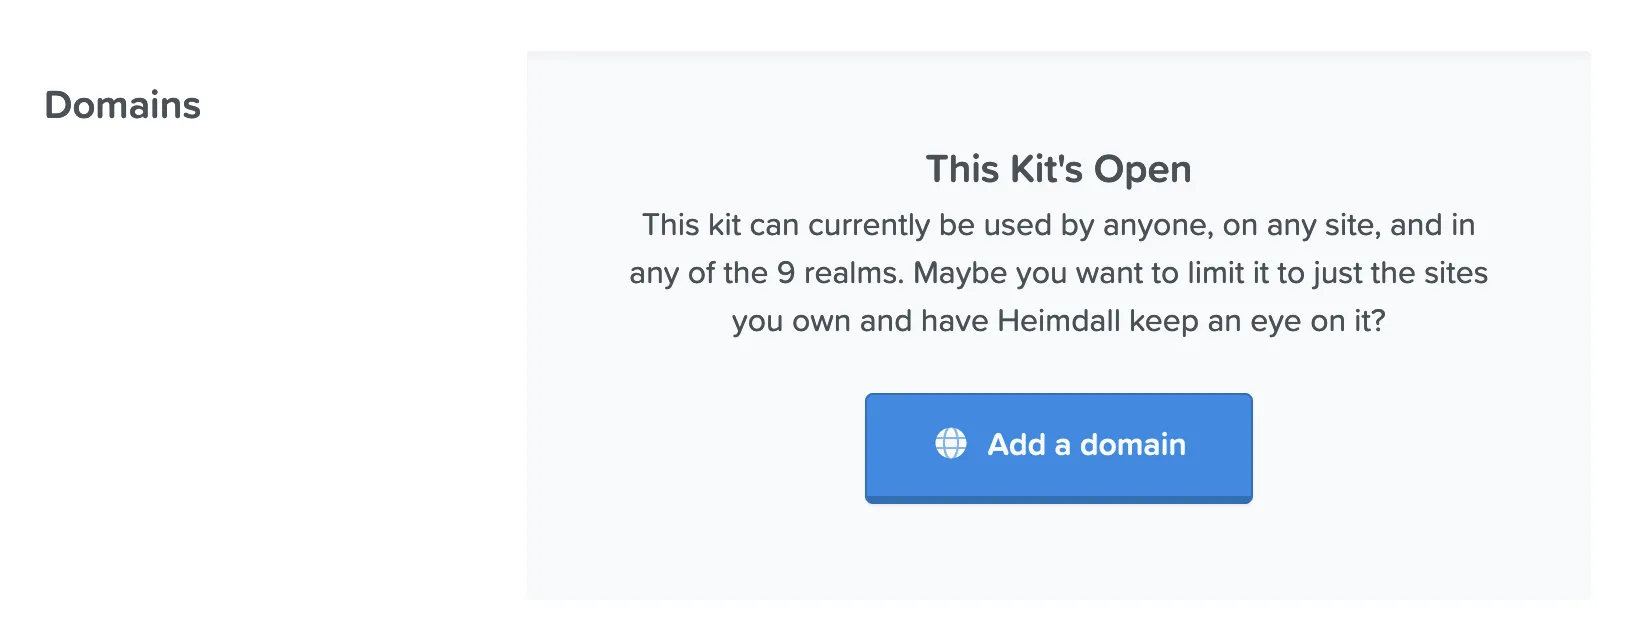 Add Domains to Kit Settings